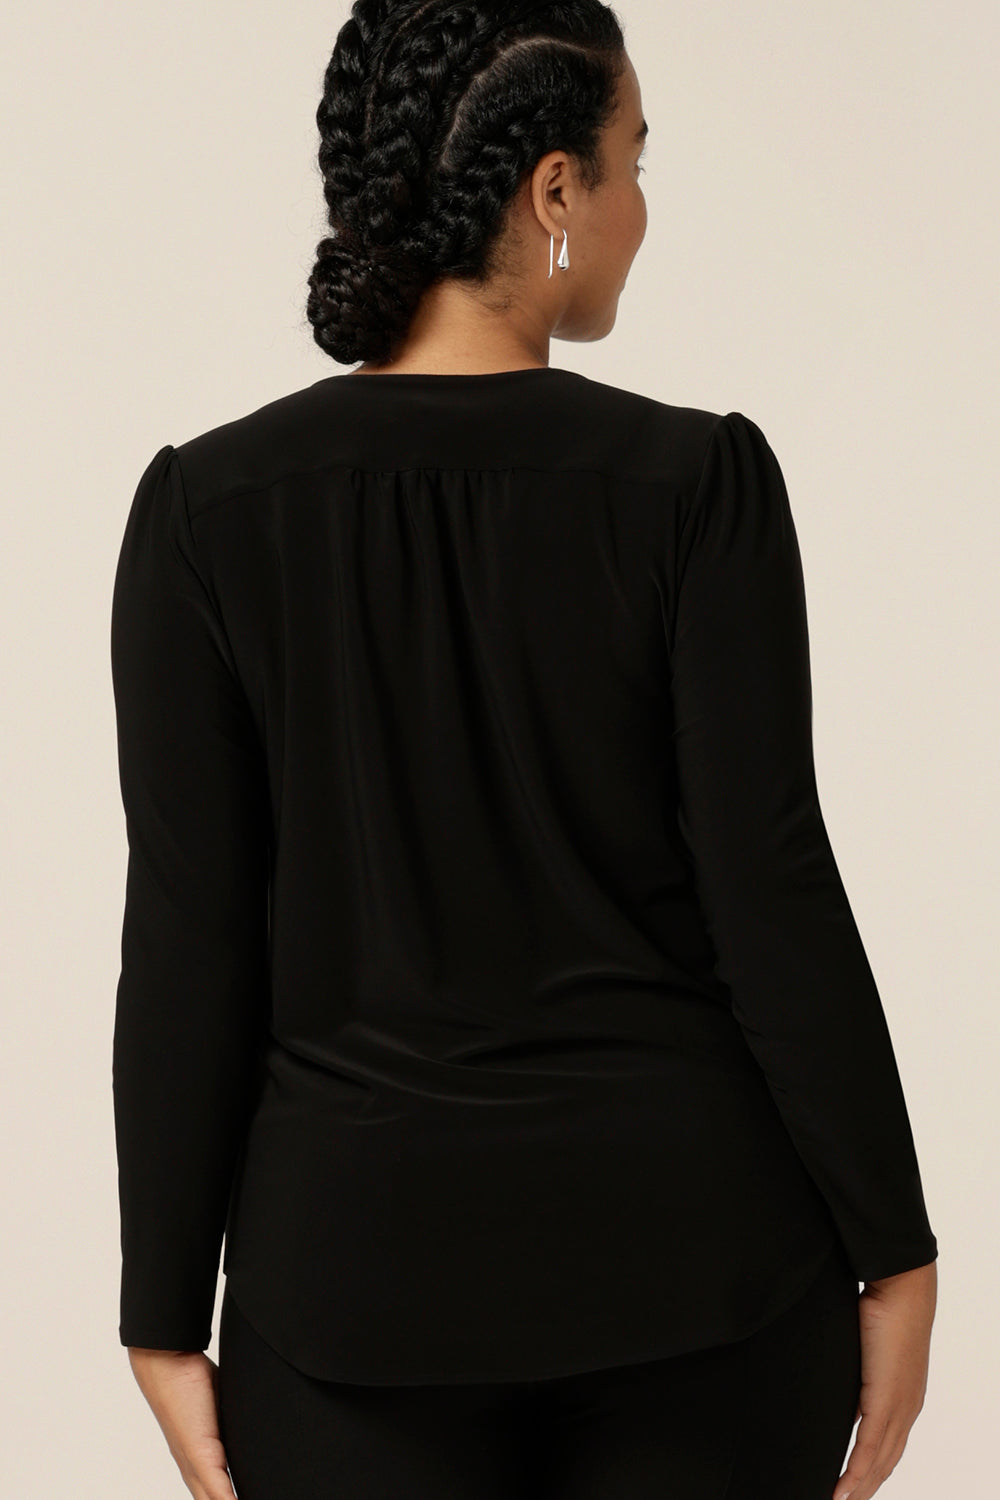 Back view of a size 12, curvy woman wearing a long sleeve, V neck top in black jersey. A comfortable top for work or casual wear, this classic black women's top is made in Australia by Australia and New Zealand women's fashion label, L&F.